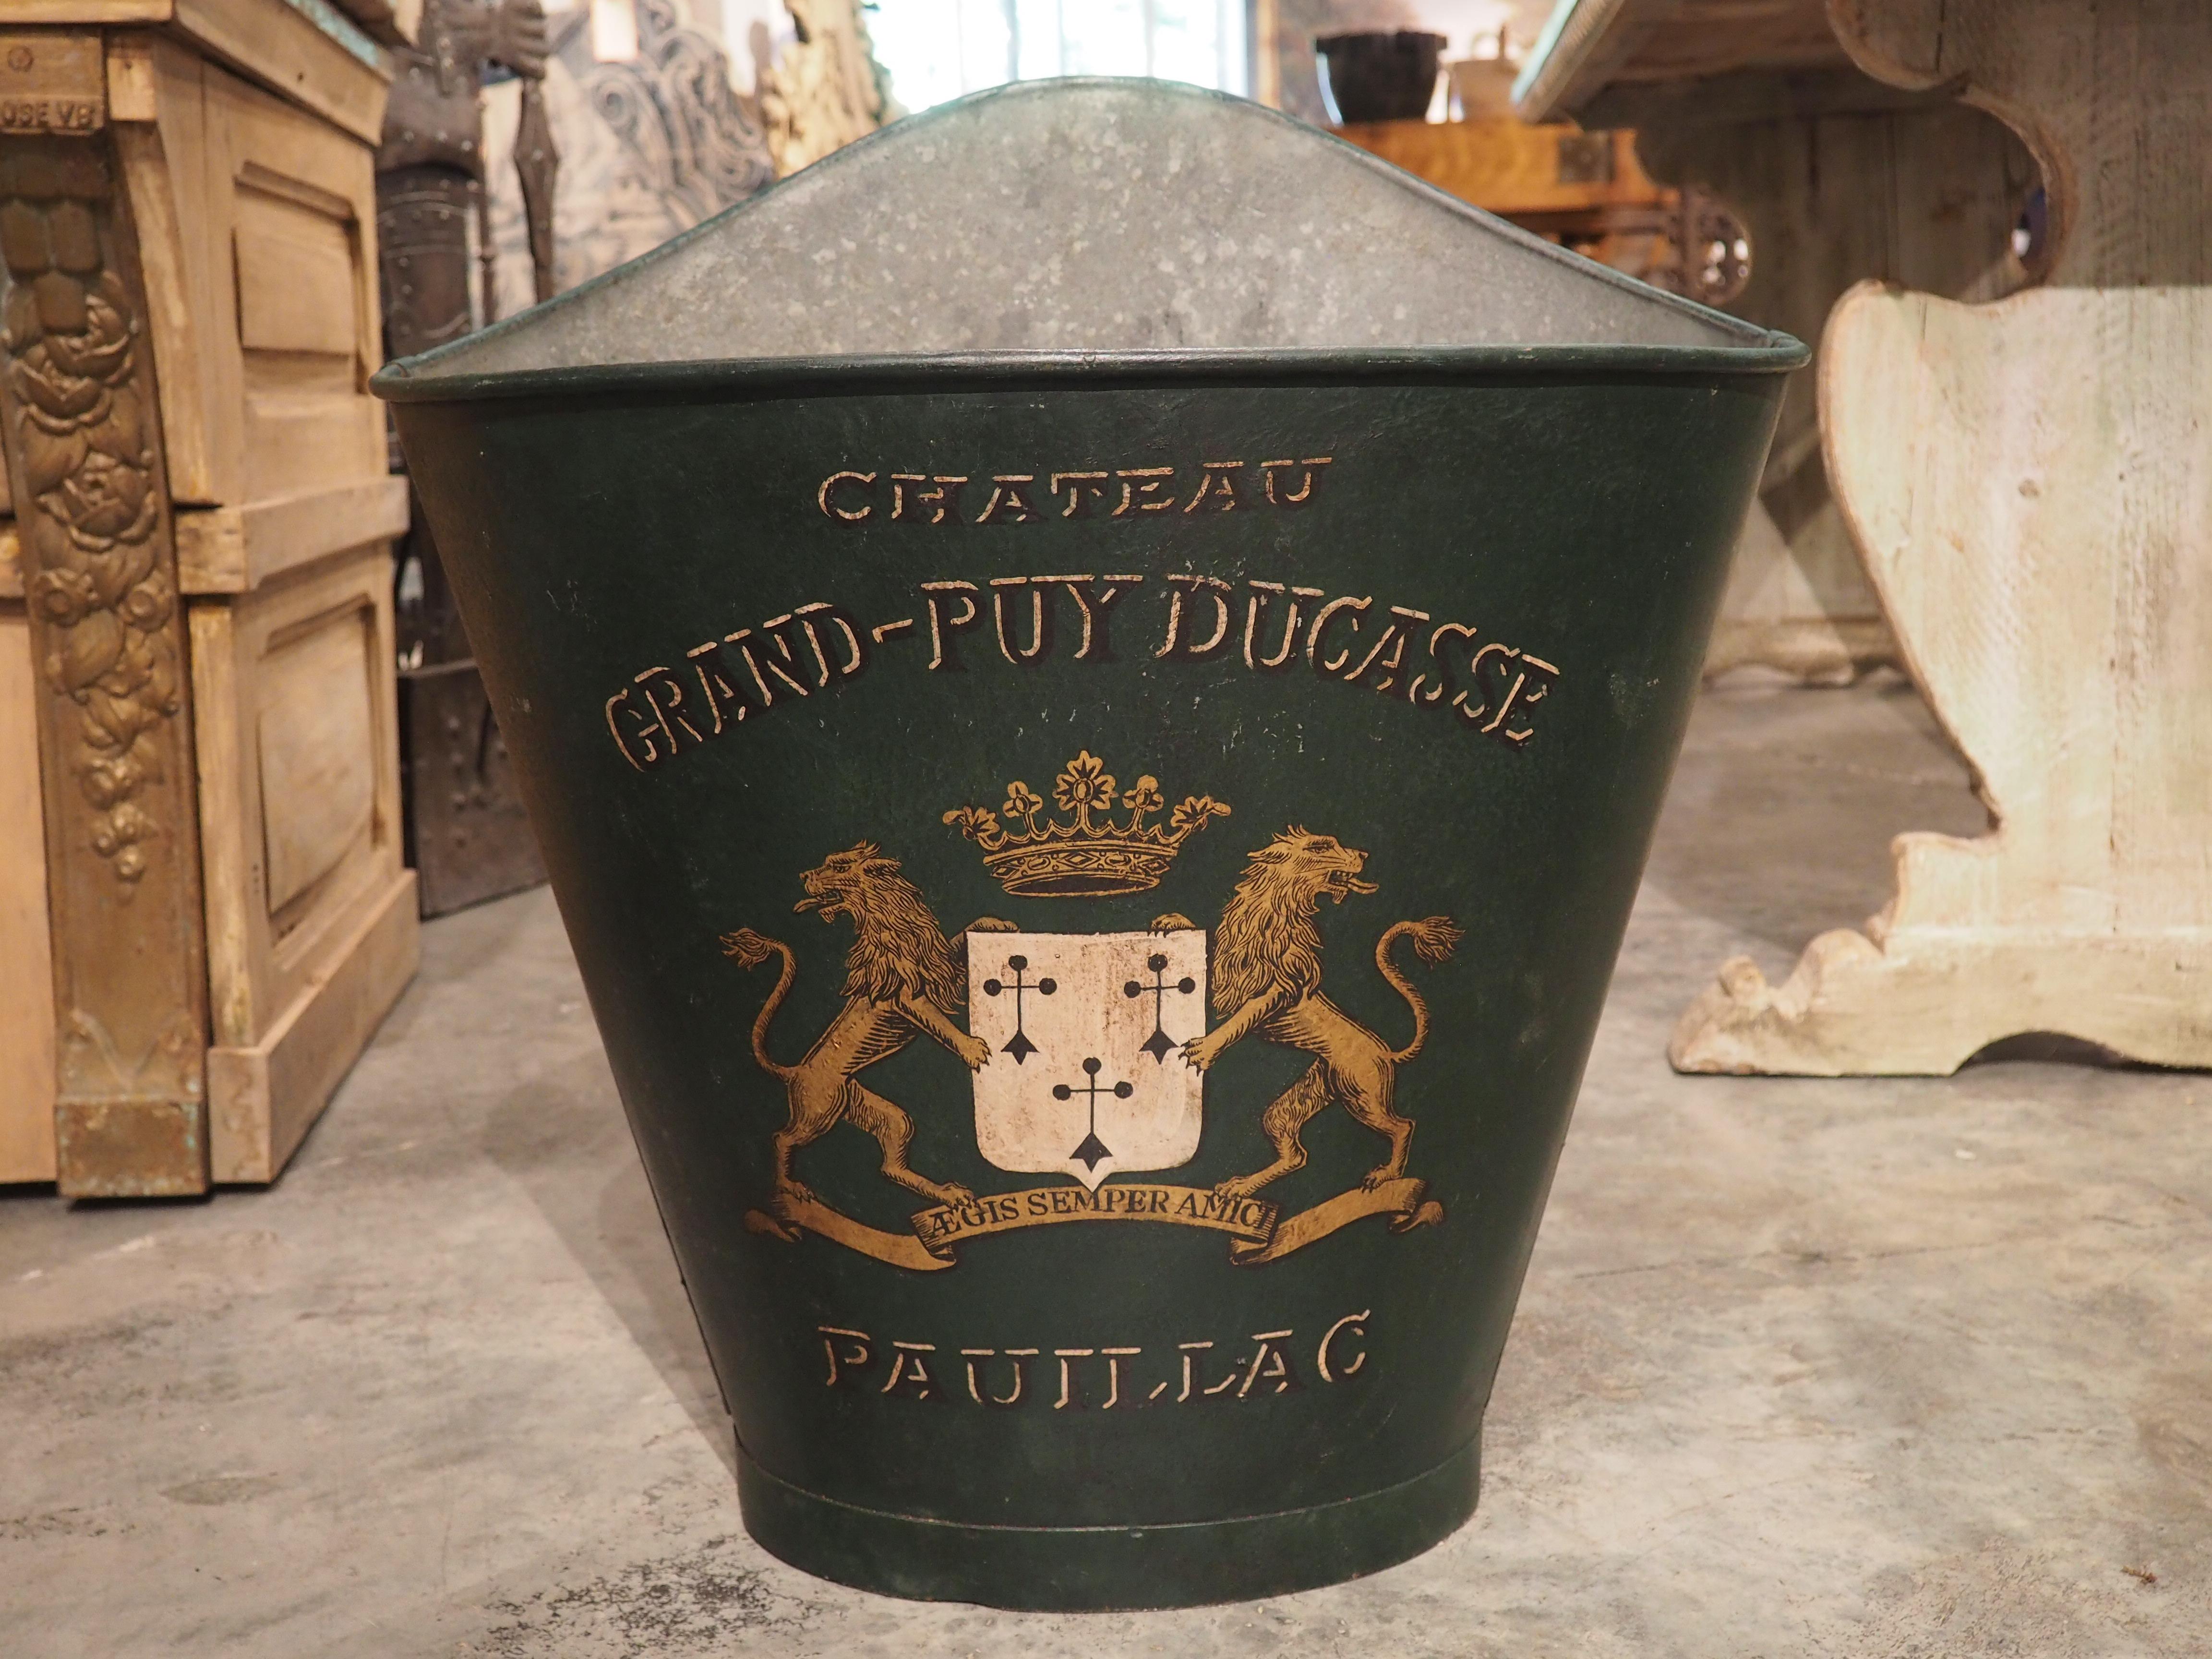 Chateau Grand-Puy Ducasse Painted Grape Hod from France, circa 1900 1